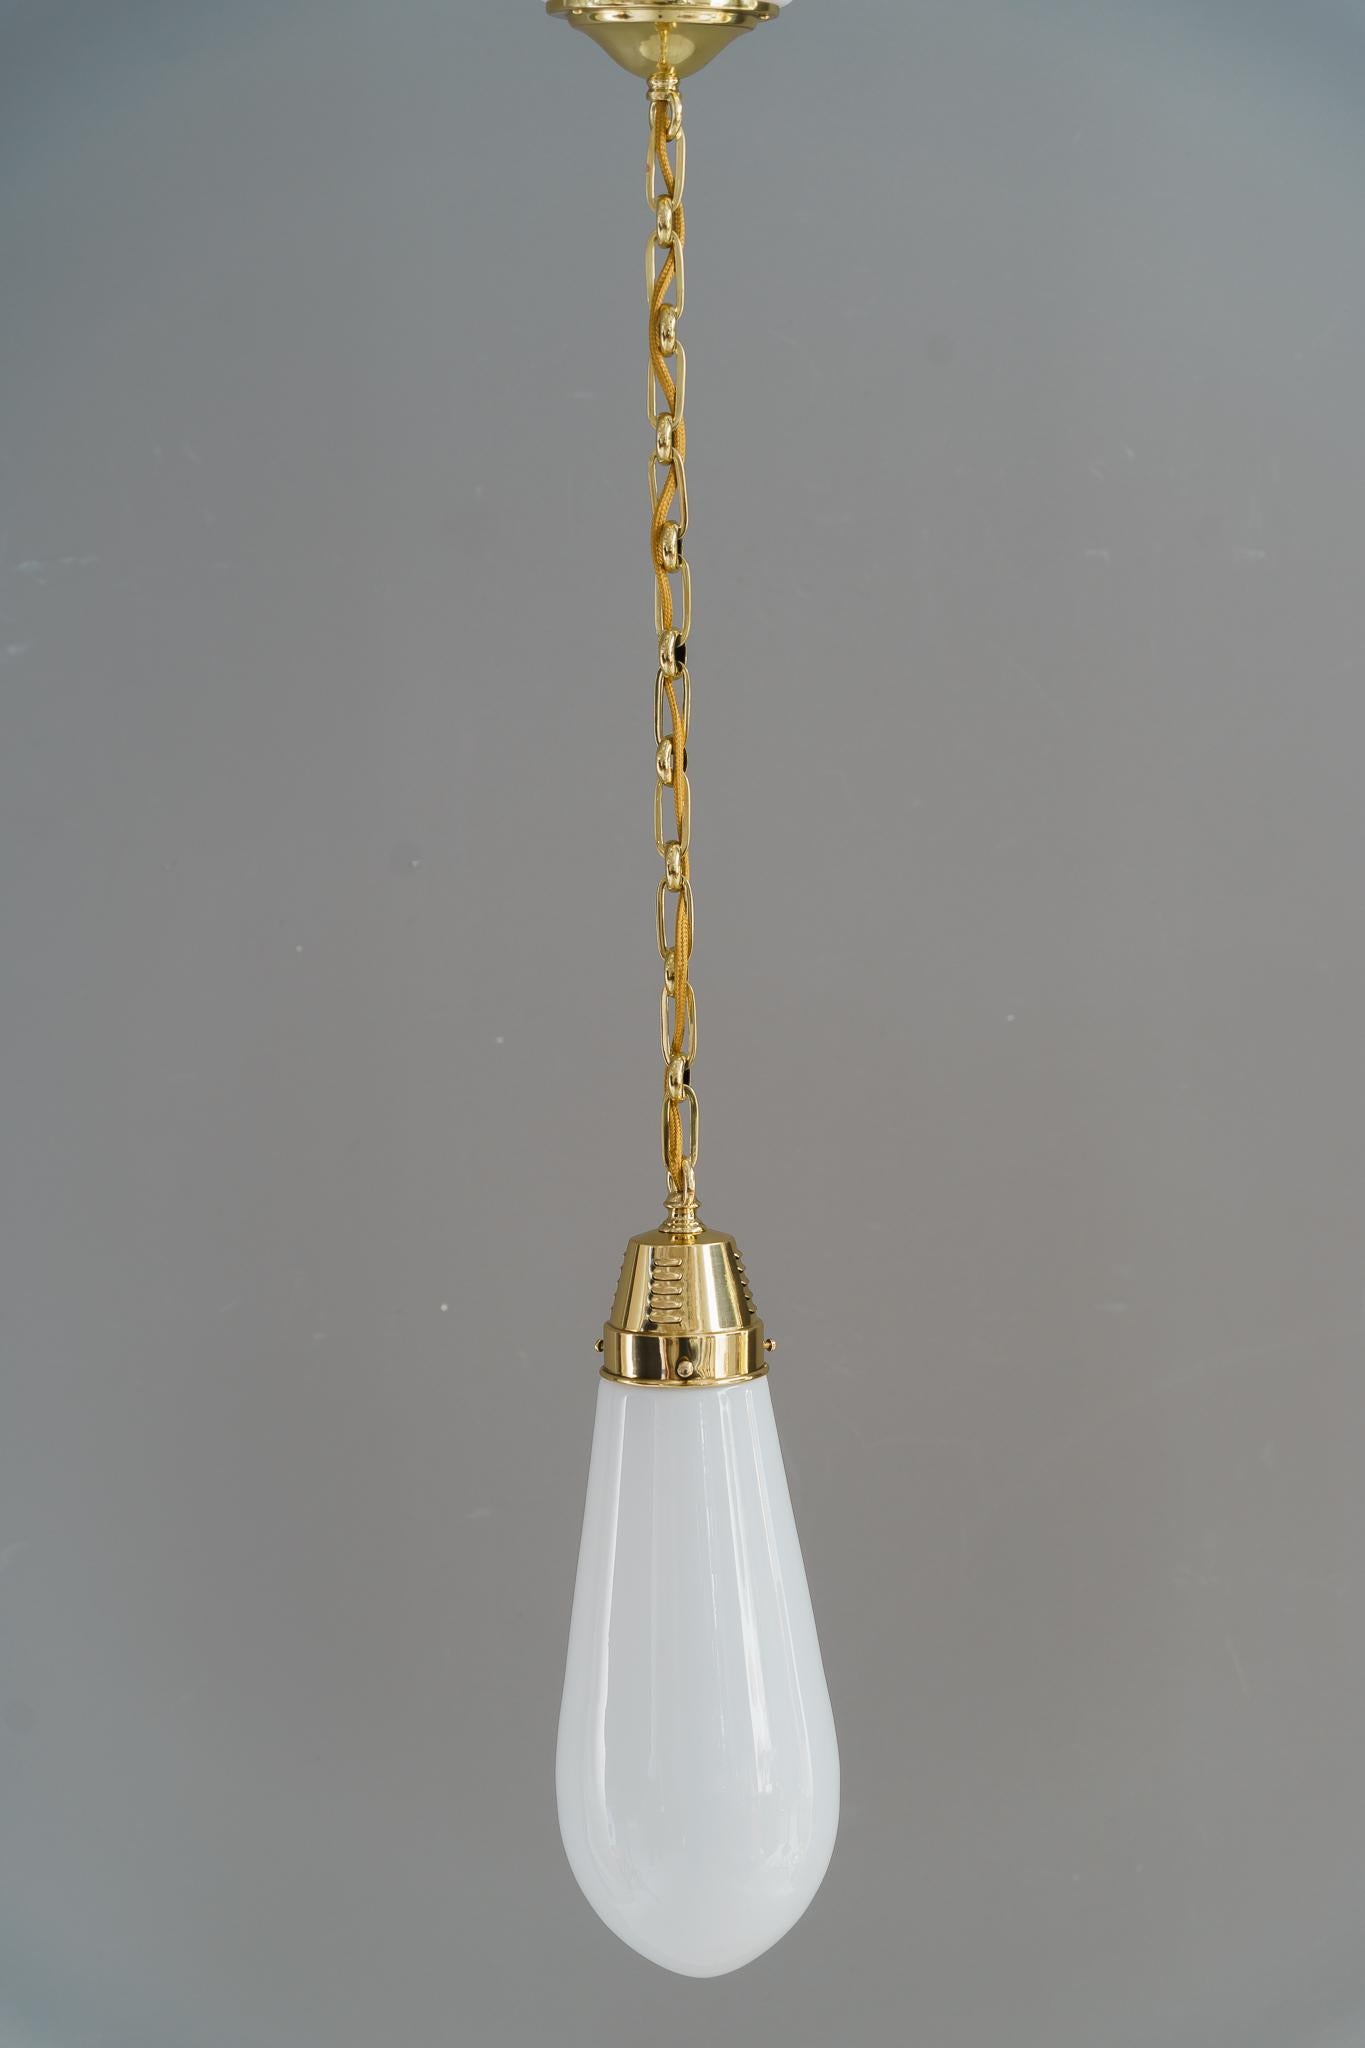 2x Art Deco Hanging lamps germany around 1920s
Original old glass shades
Brass polished and stove enameled
